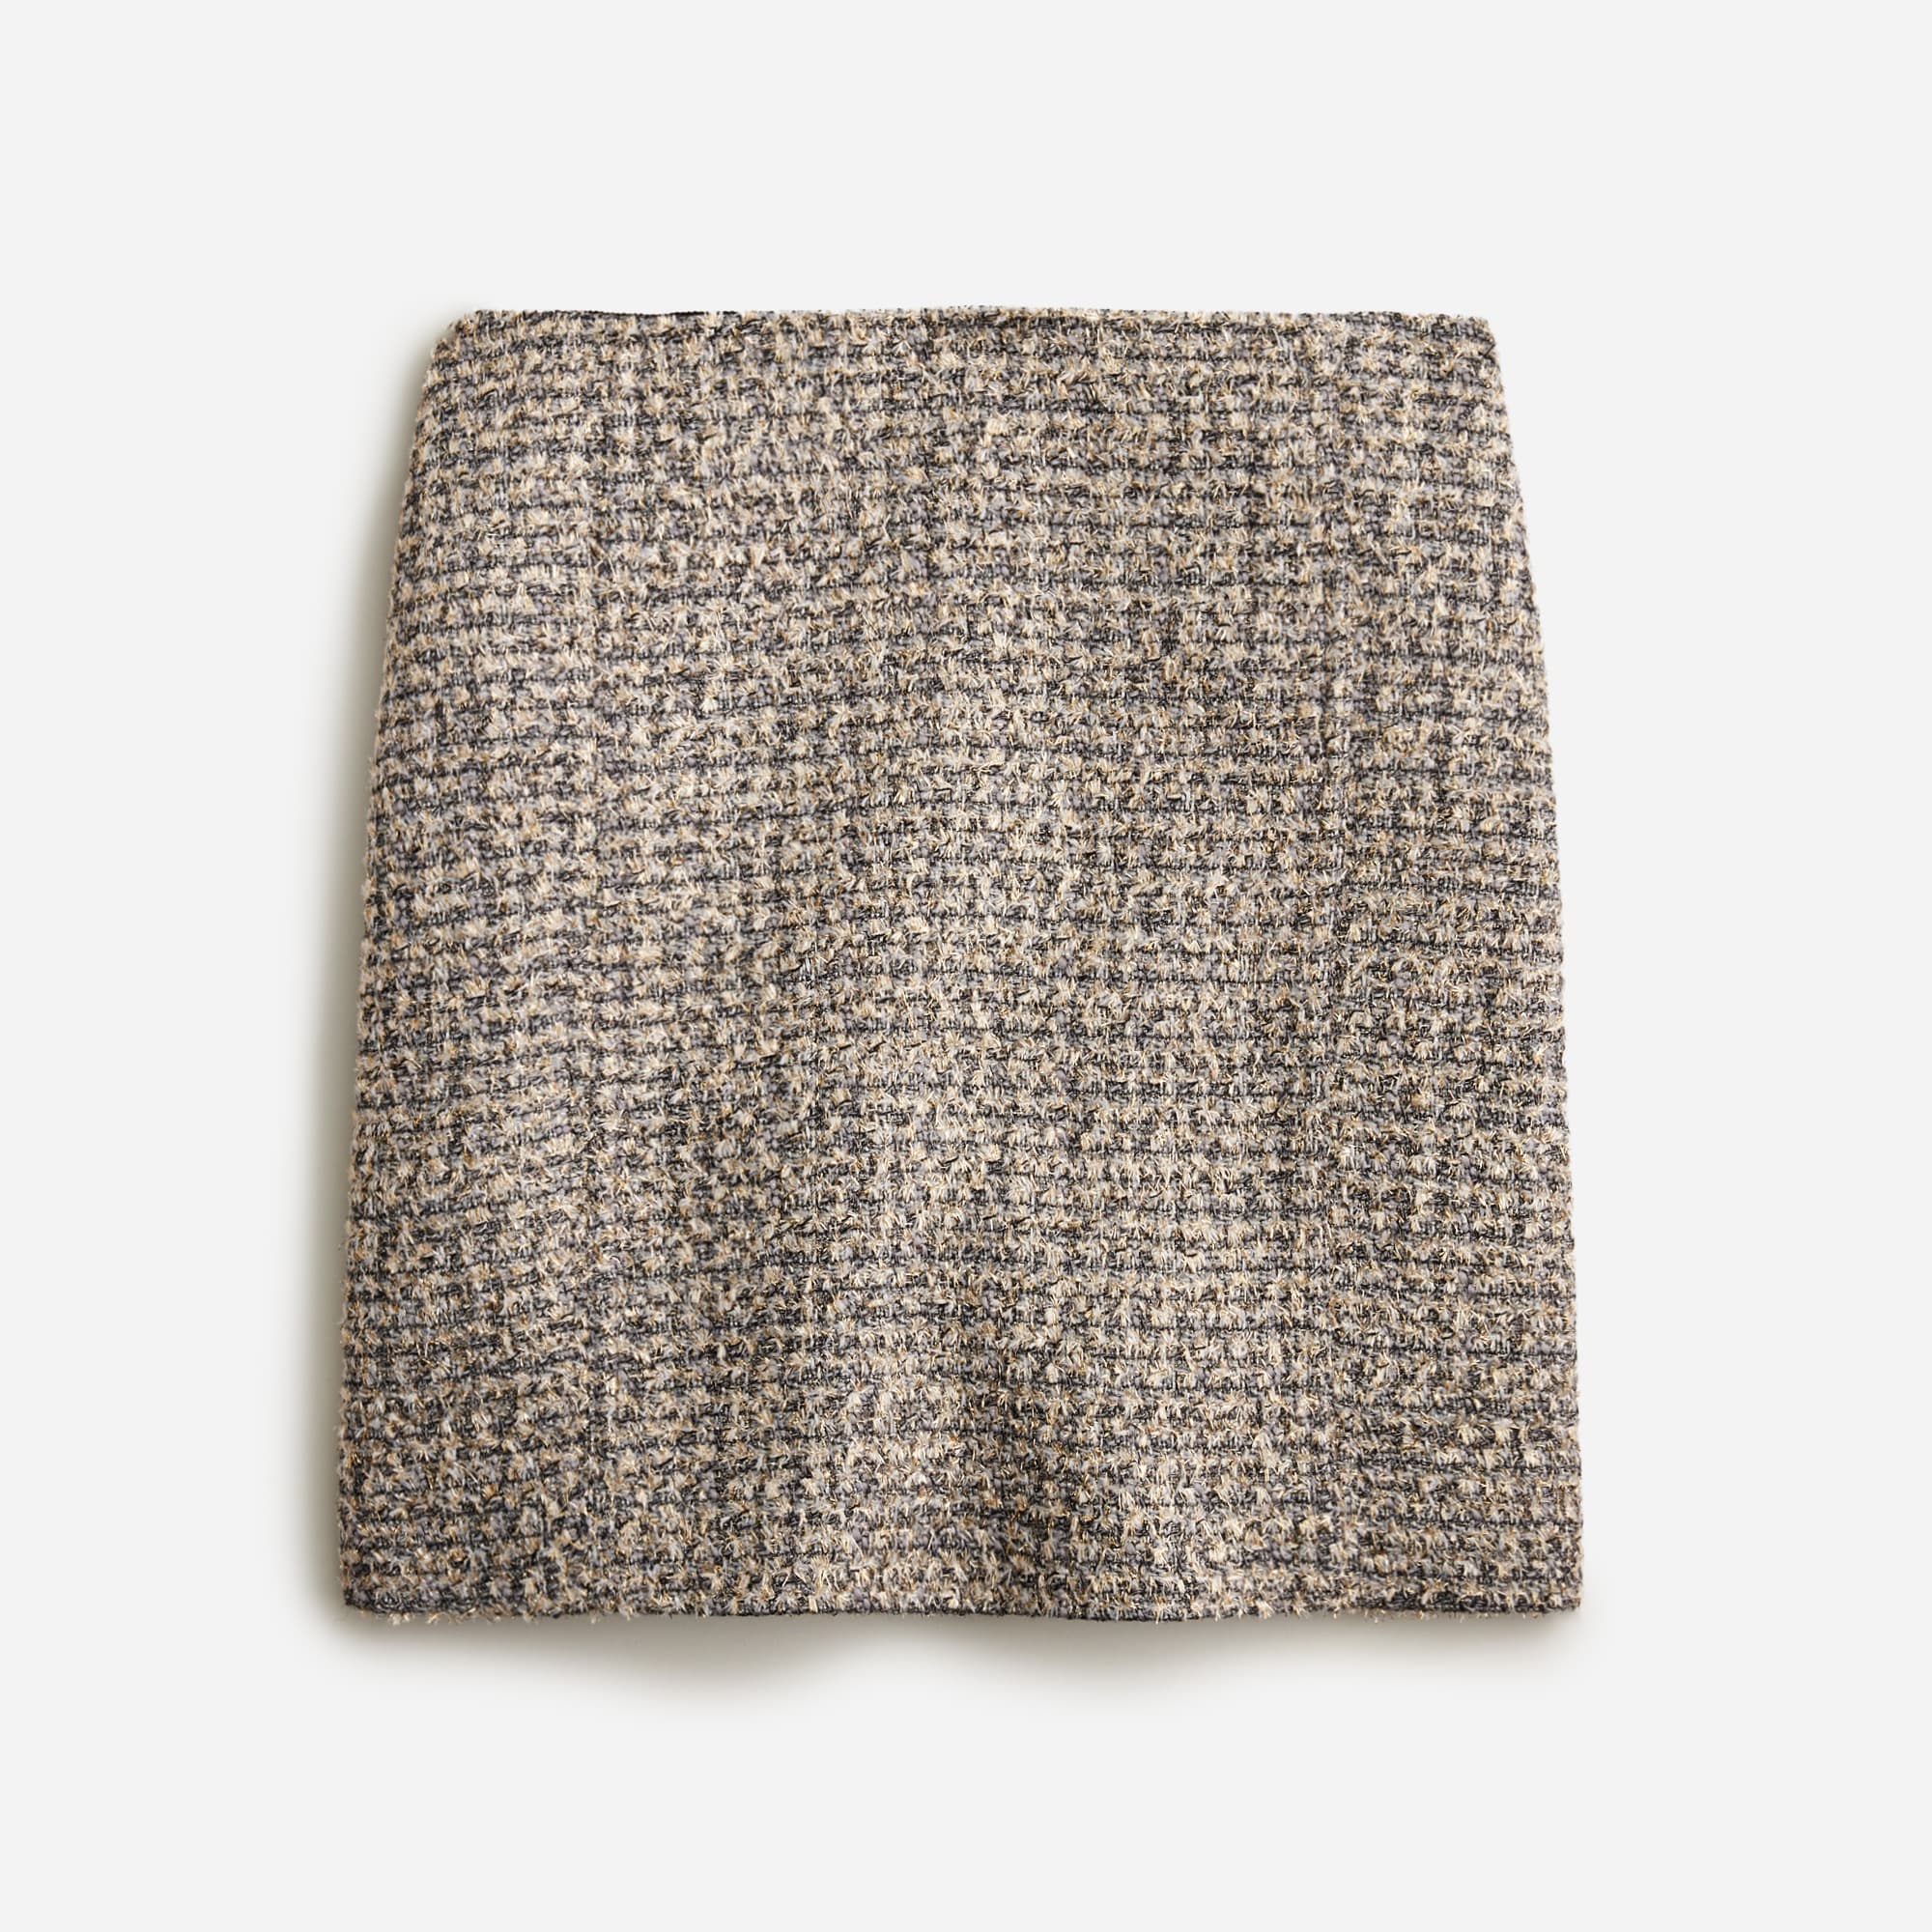  Collection A-line mini skirt in tinsel tweed